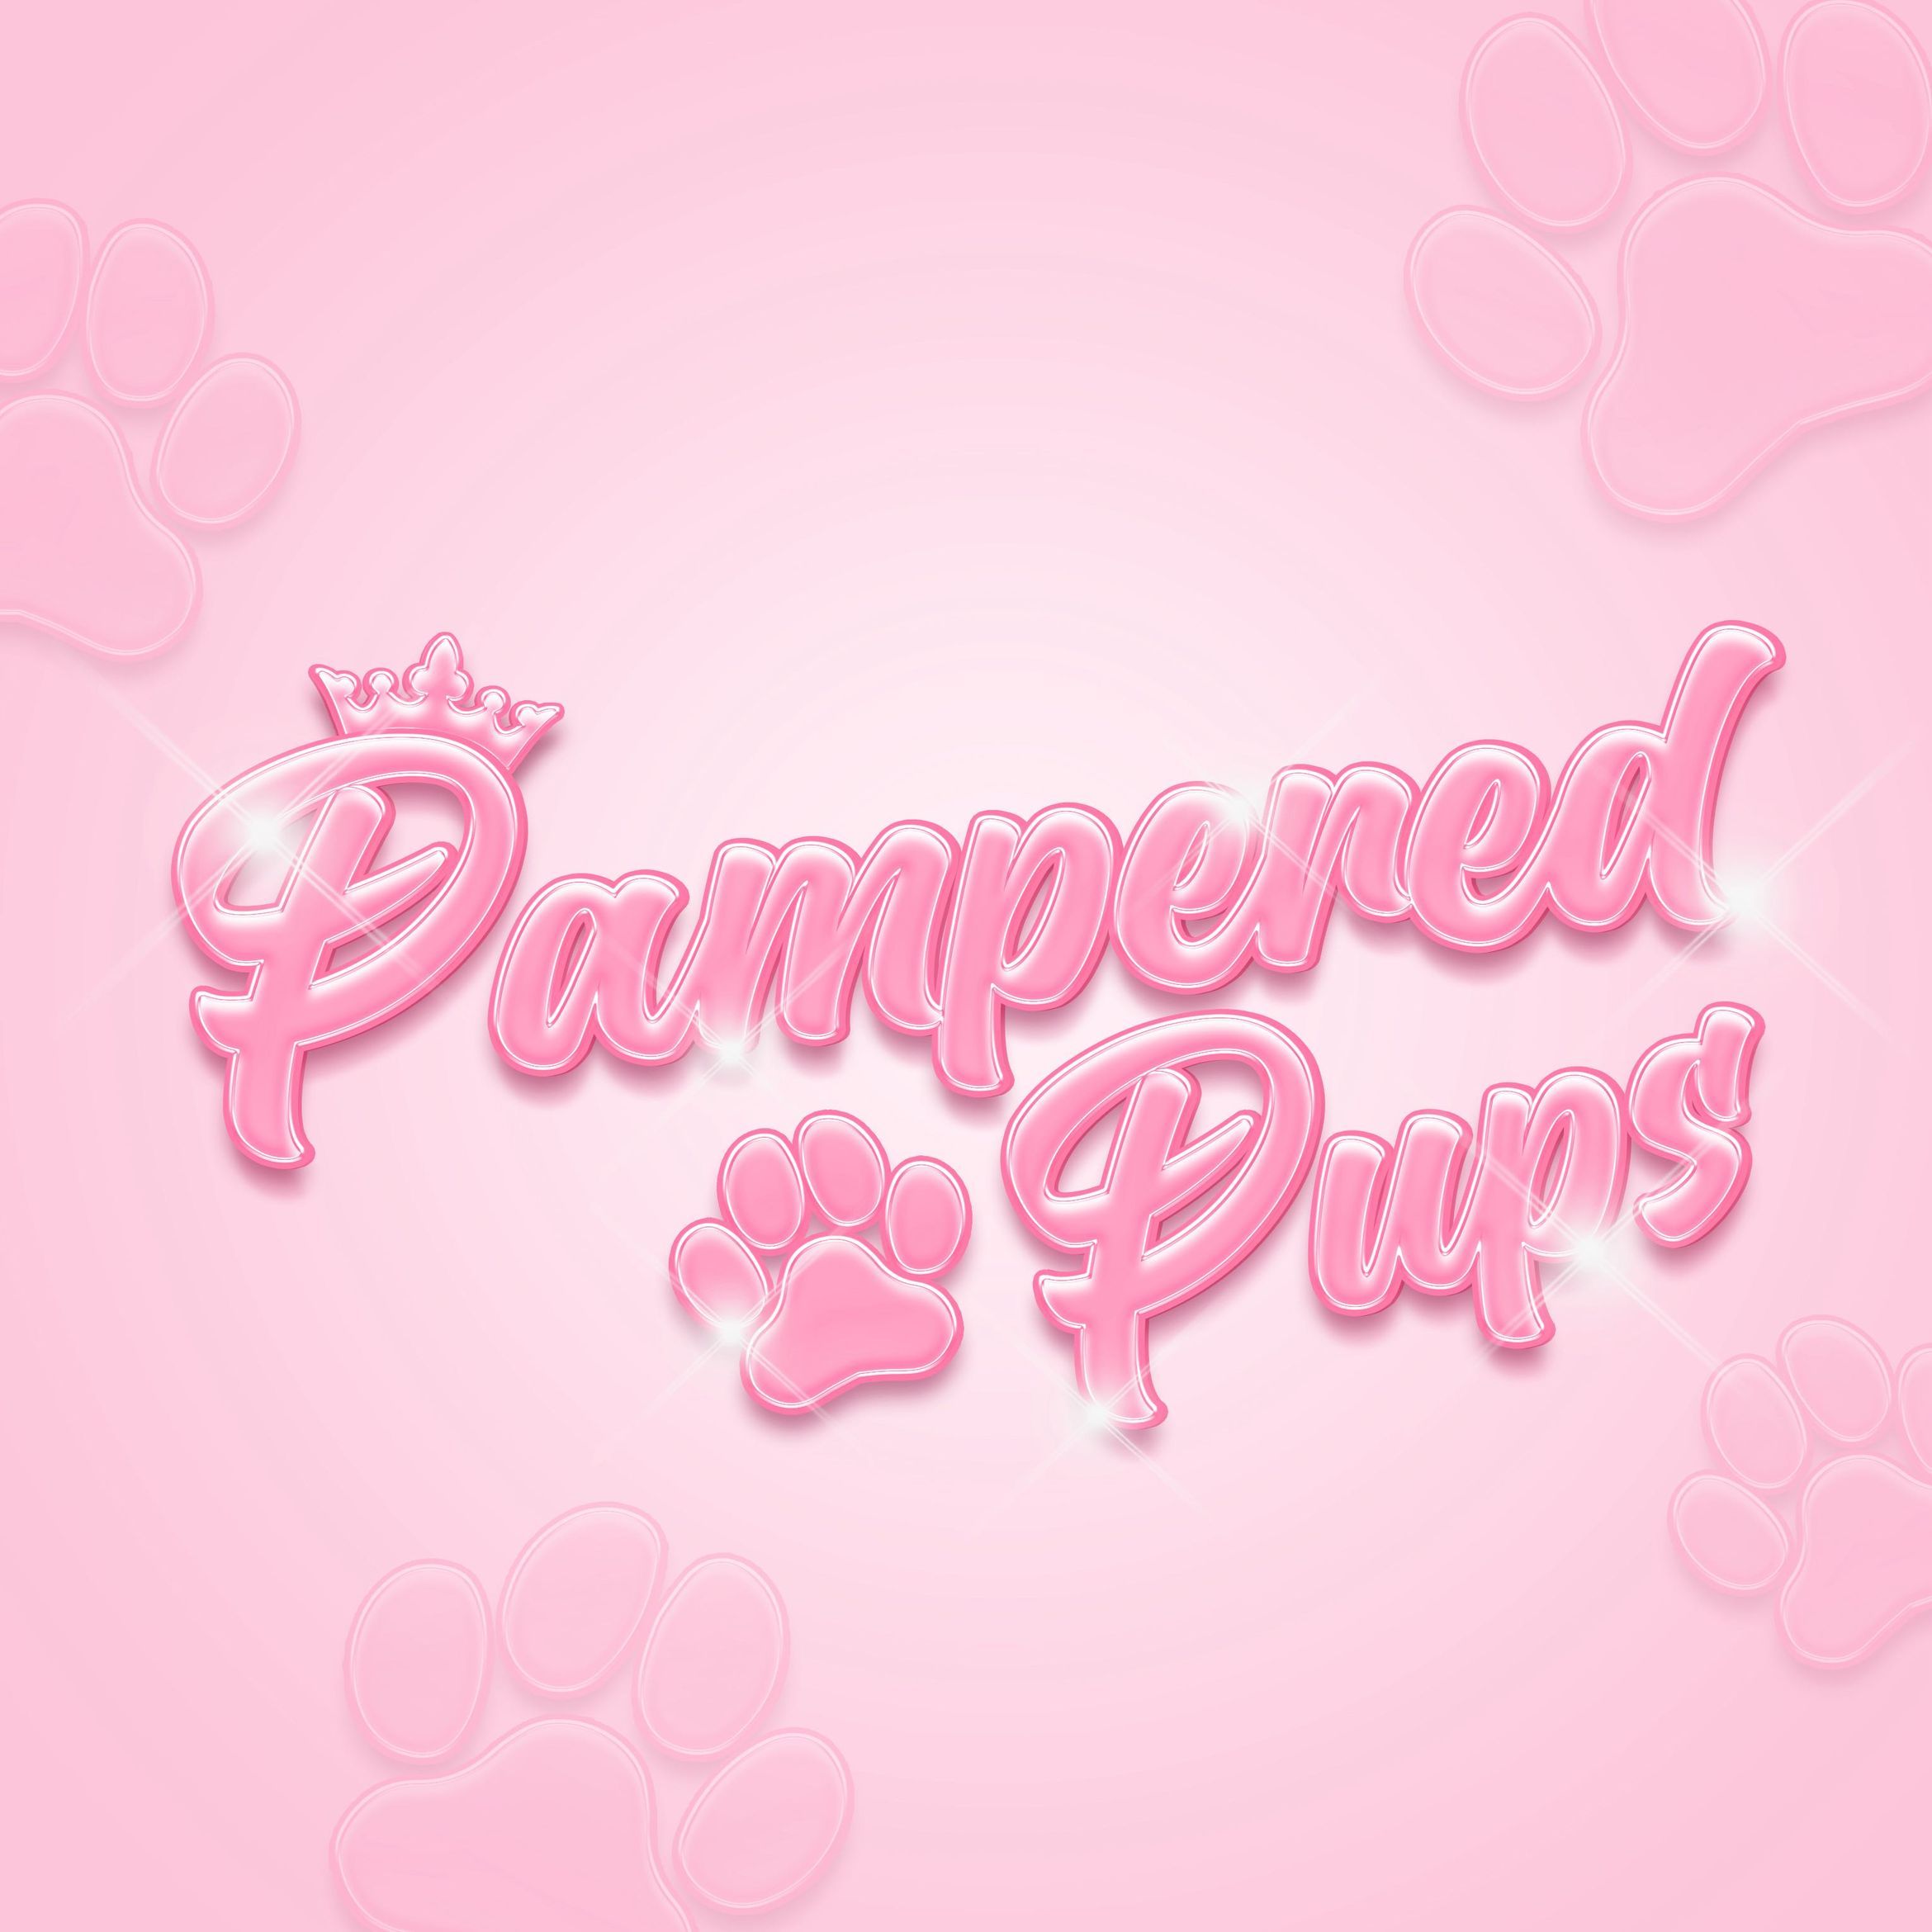 Rhiannon Drain - Pampered Pups Dog Grooming